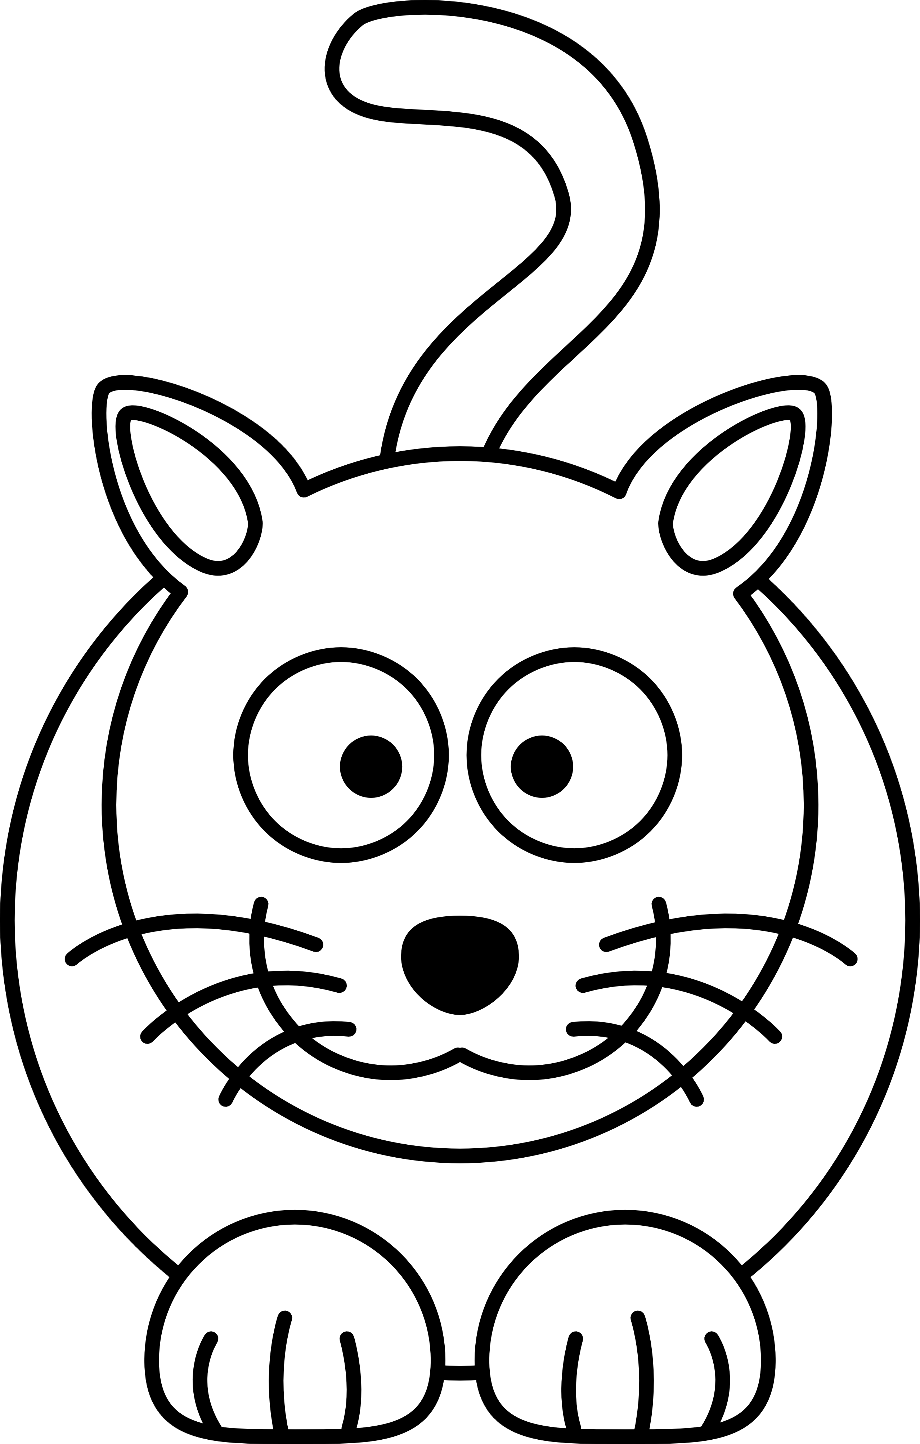 cat-clipart-black-and-white-picture-1636-cat-clipart-black-and-white